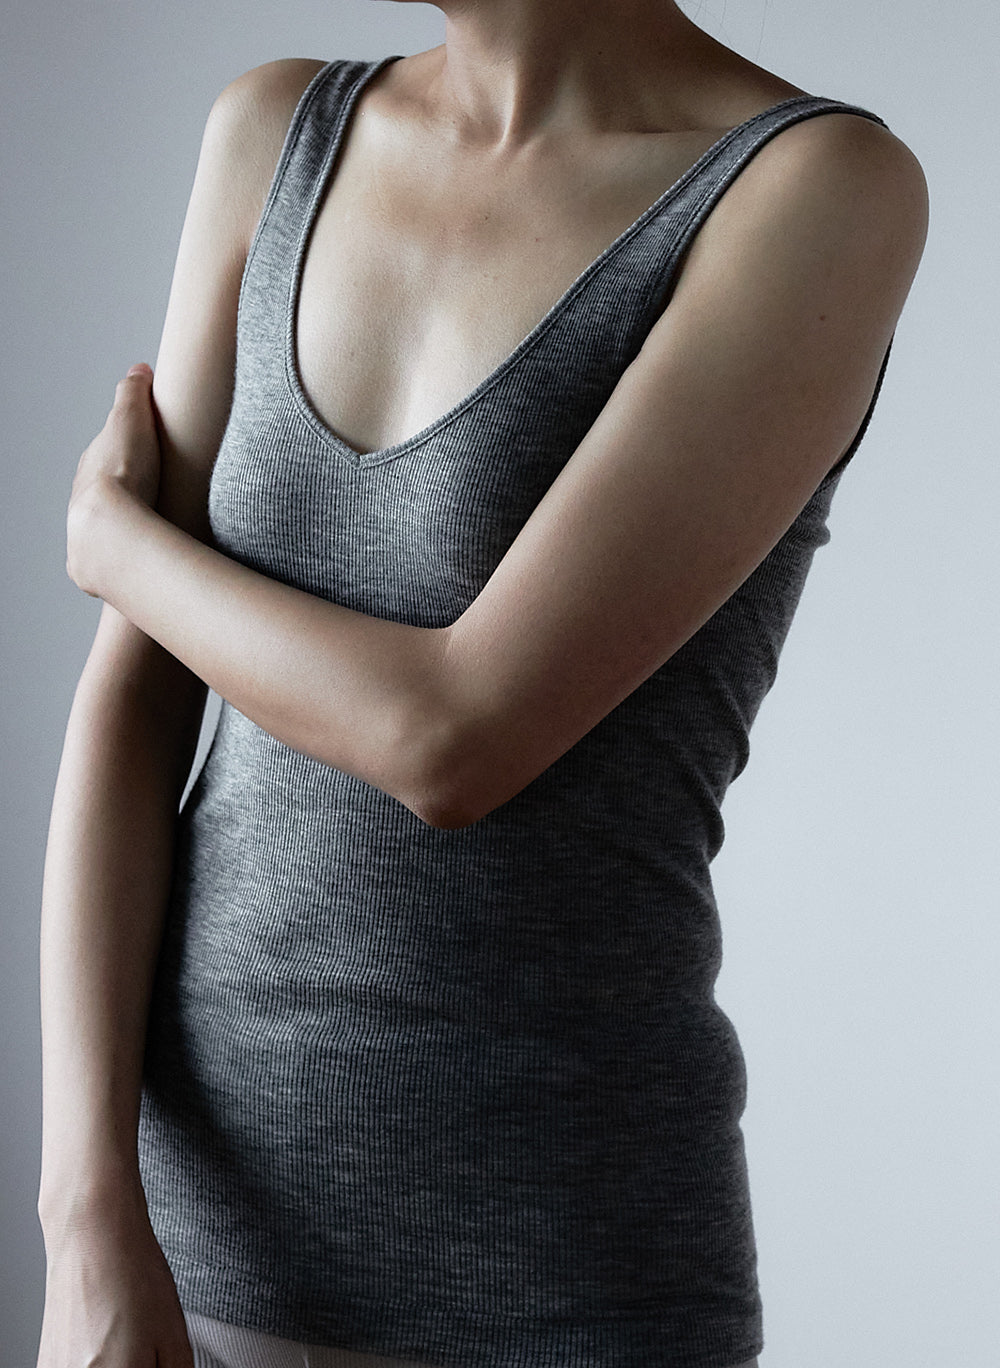 BUNNY -Double V-neck cami tank-【N.Cashmere】